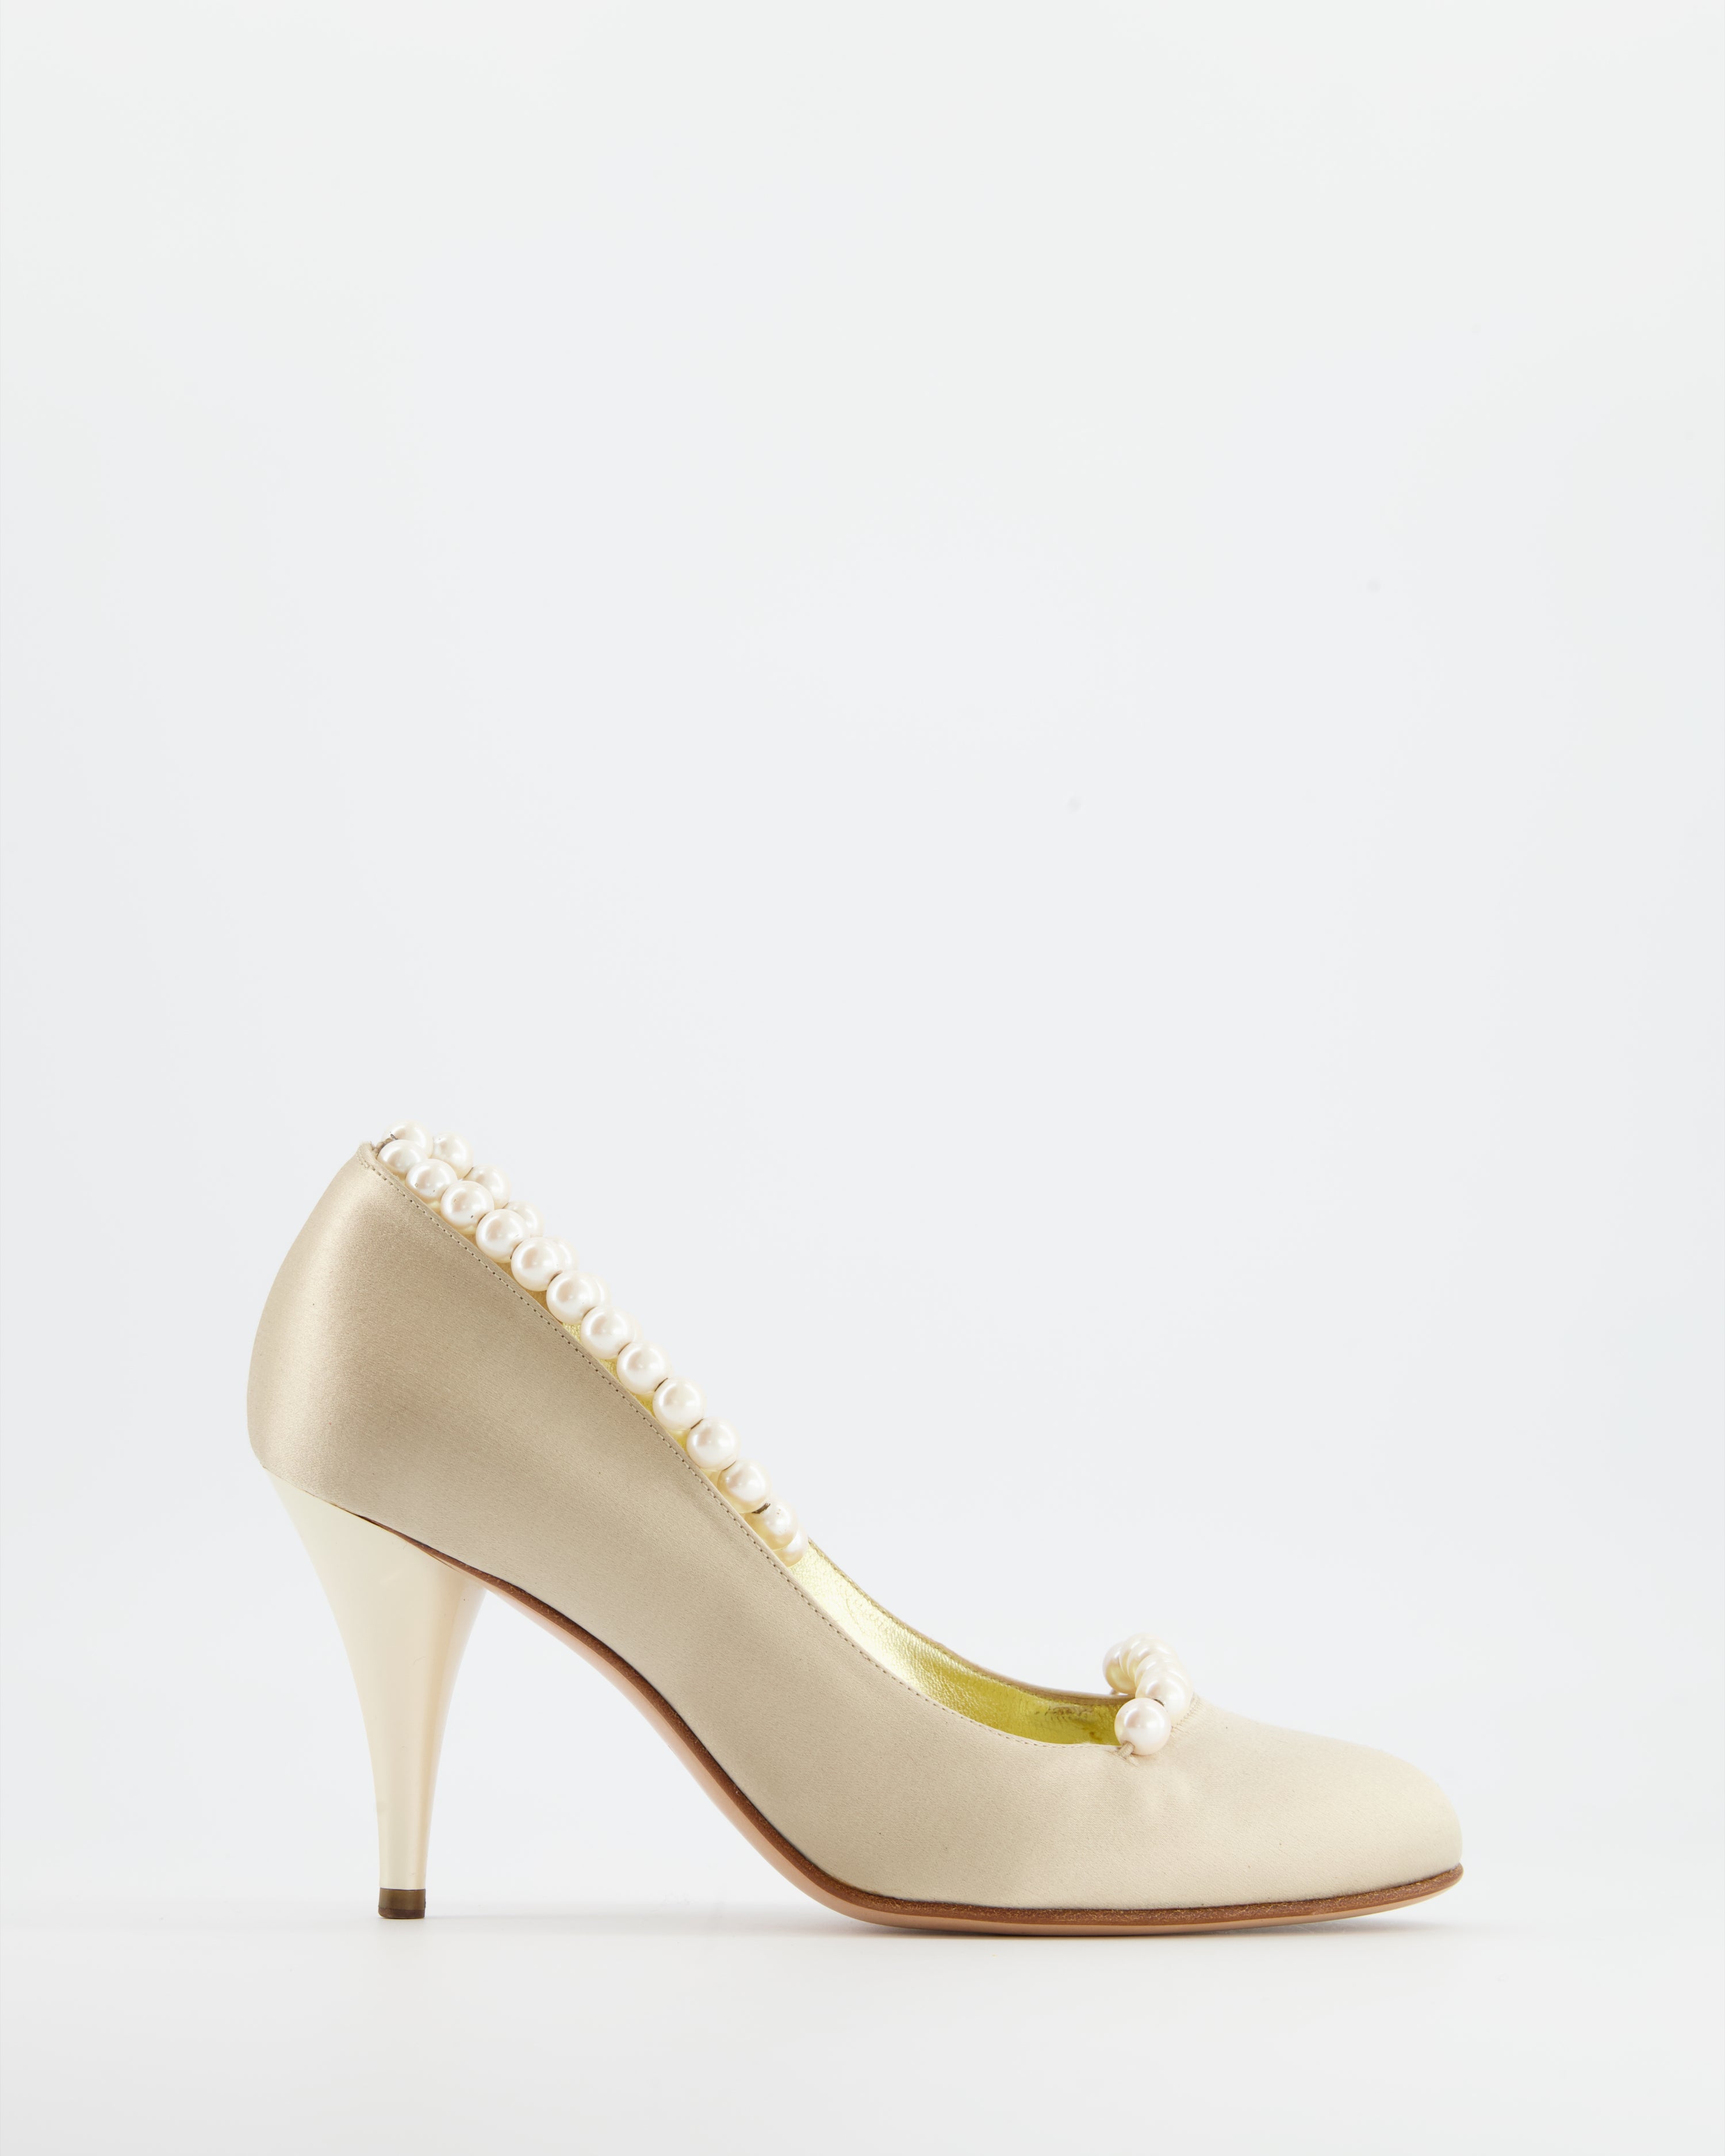 Chanel Cream Satin Heel with Pearl Detail Size 37 – Sellier